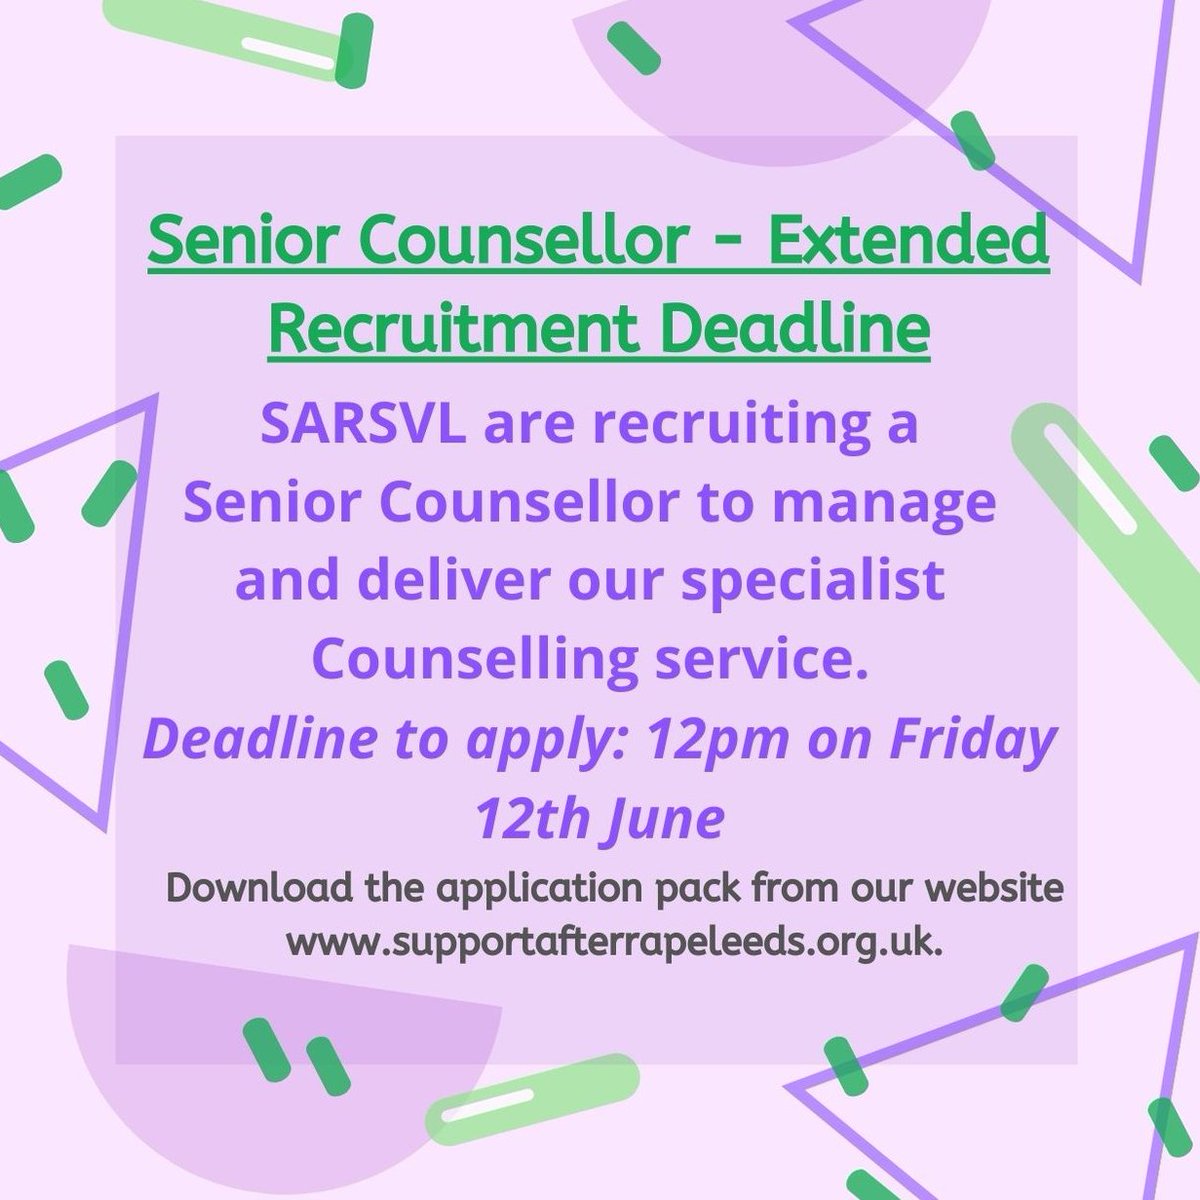 Our recruitment for a Senior Counsellor has been extended to this Friday 12th June at 12pm.
For the application pack and details about the post please visit our website: supportafterrapeleeds.org.uk/we-are-recruit…
#LeedsJob #CounsellingJob